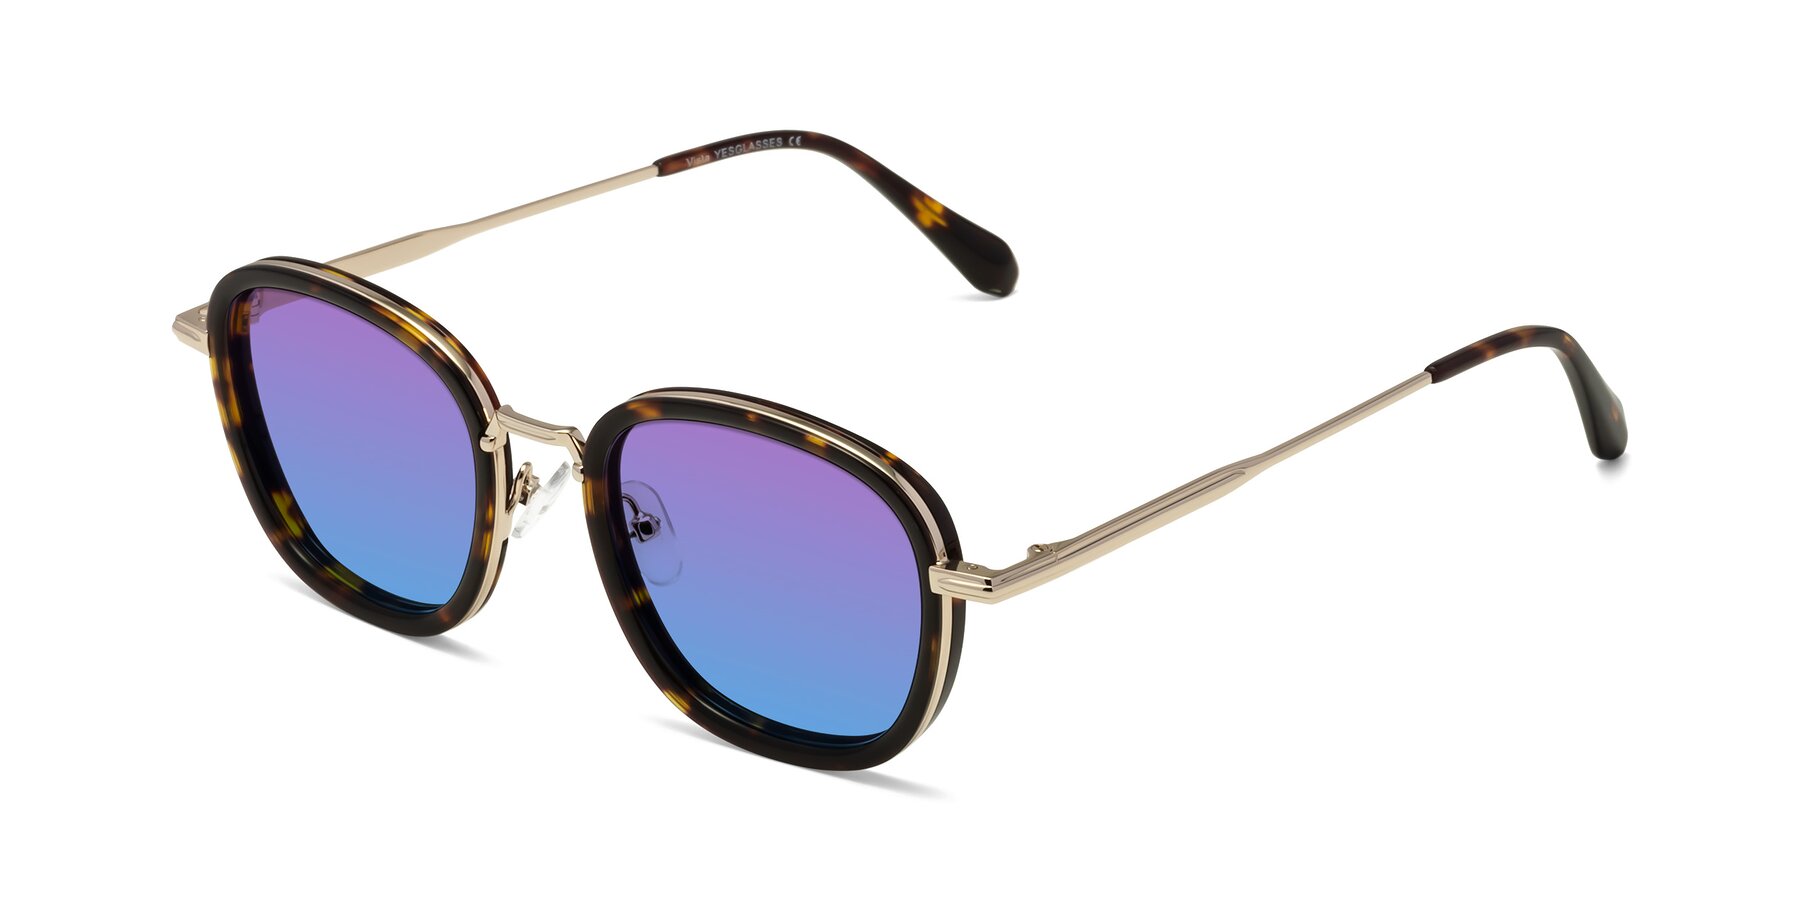 Angle of Vista in Tortoise-Light Gold with Purple / Blue Gradient Lenses